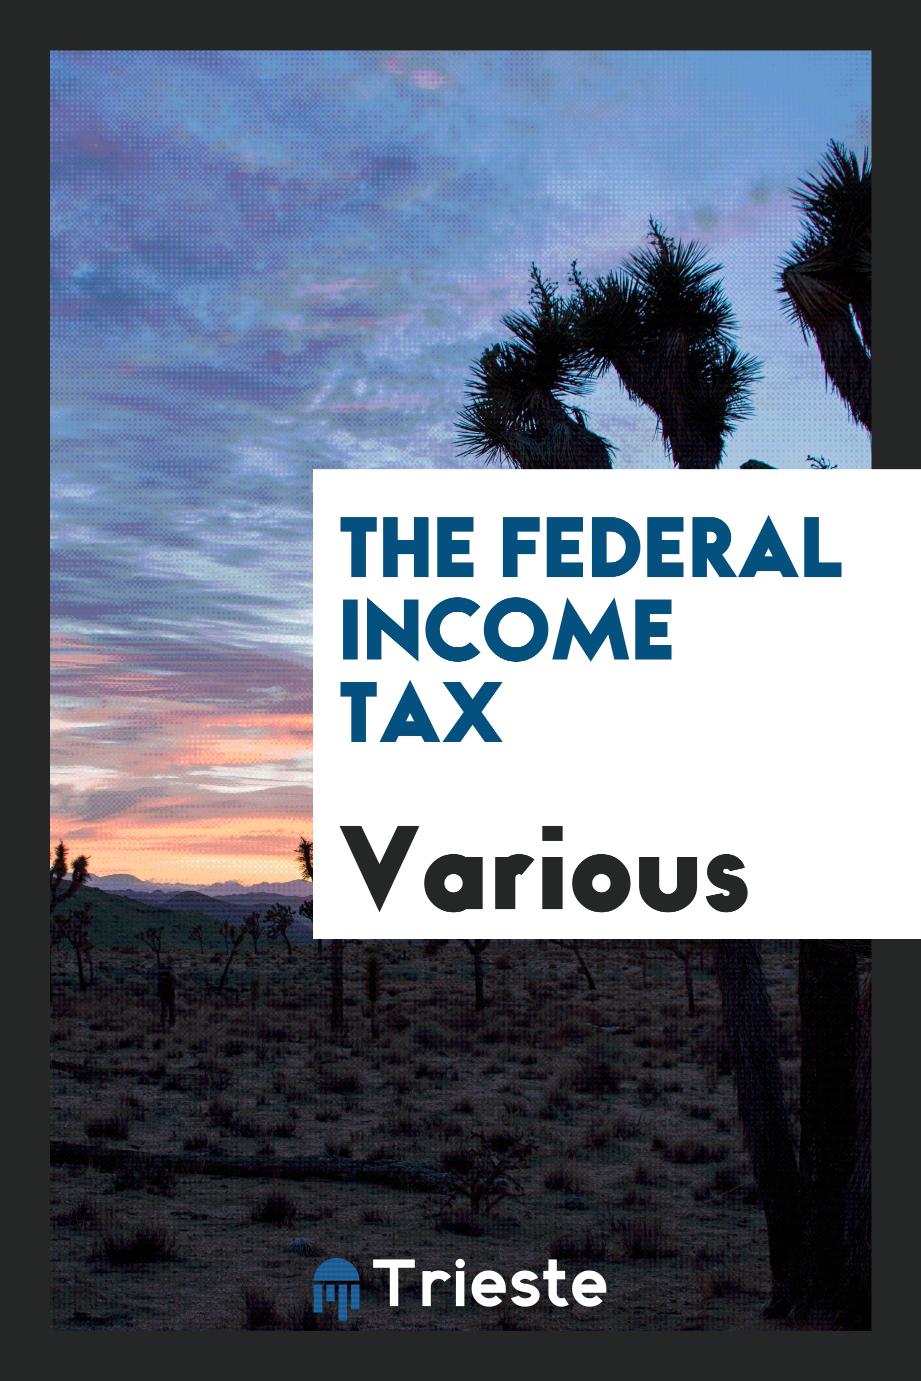 The federal income tax